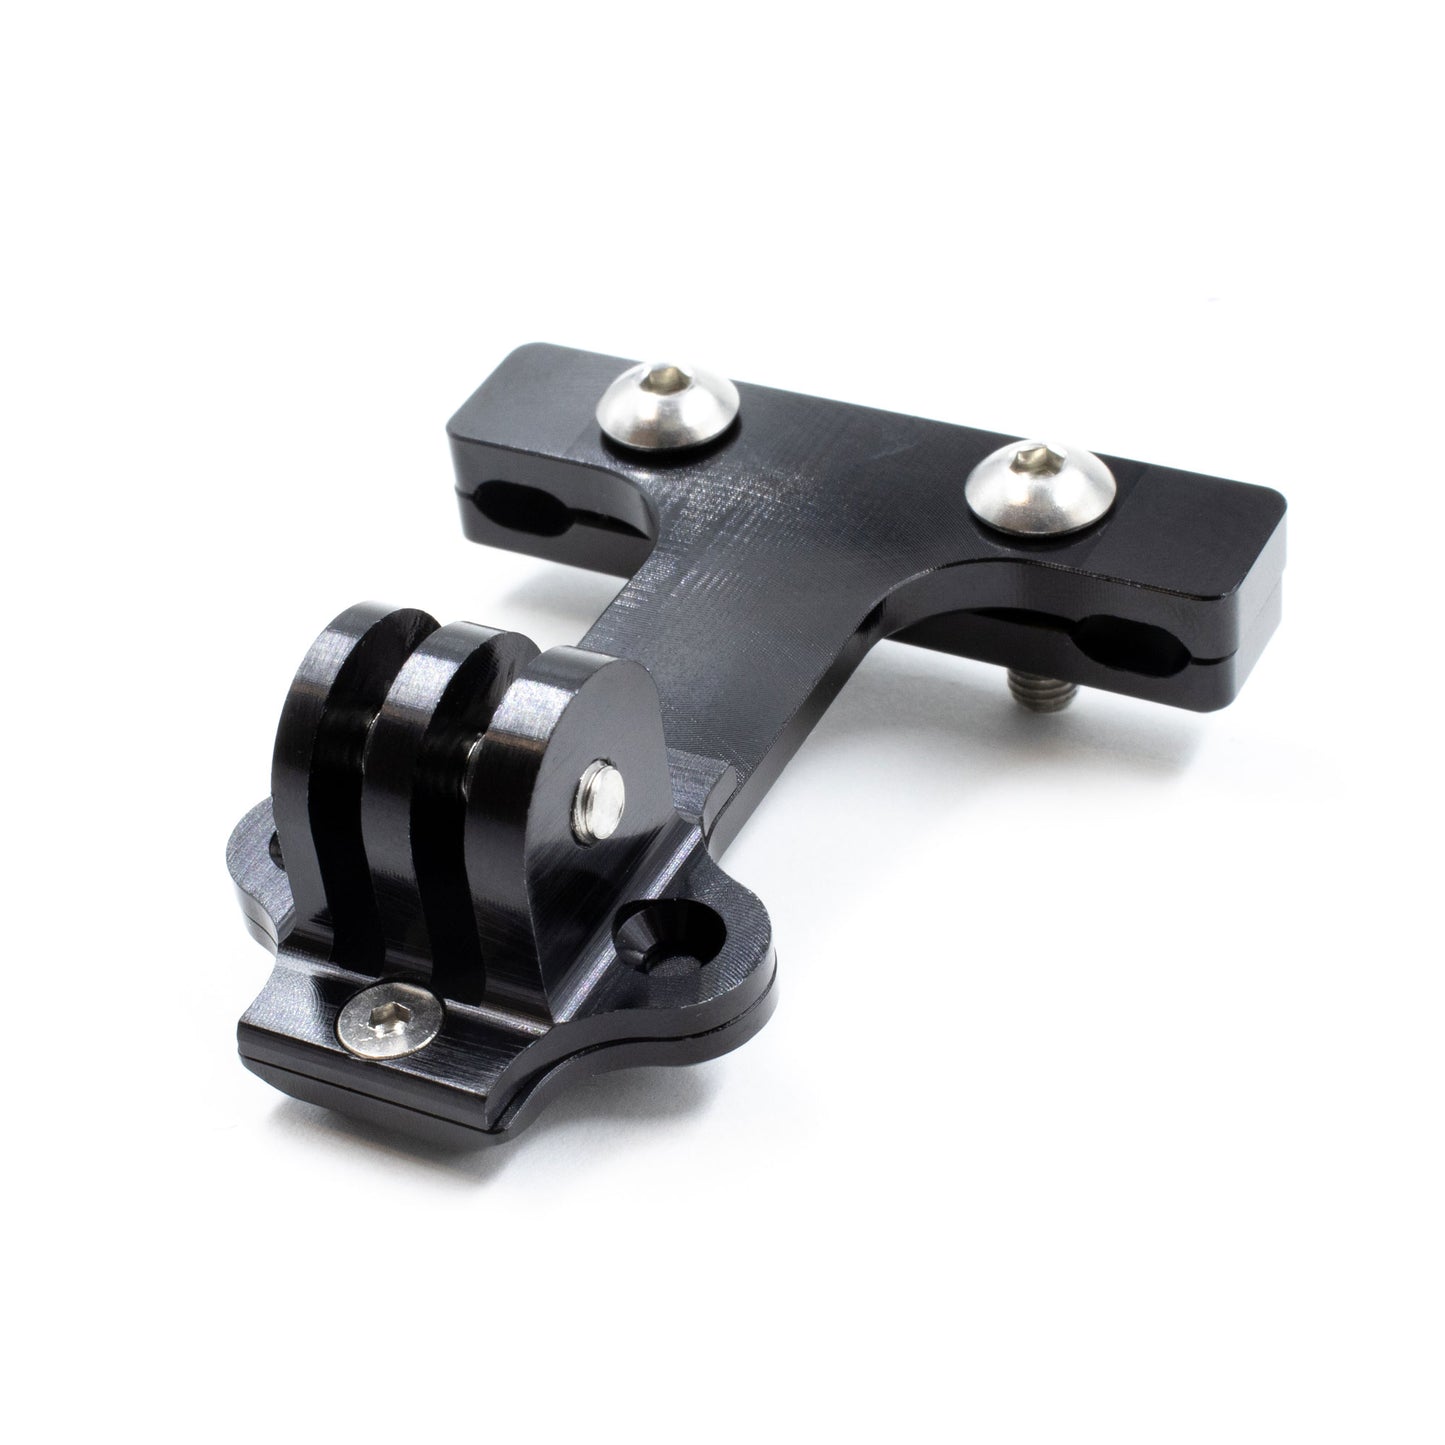 Black saddle rail mount with adaptor piece for rear lights and action cameras. View of adaptor from underbelly.